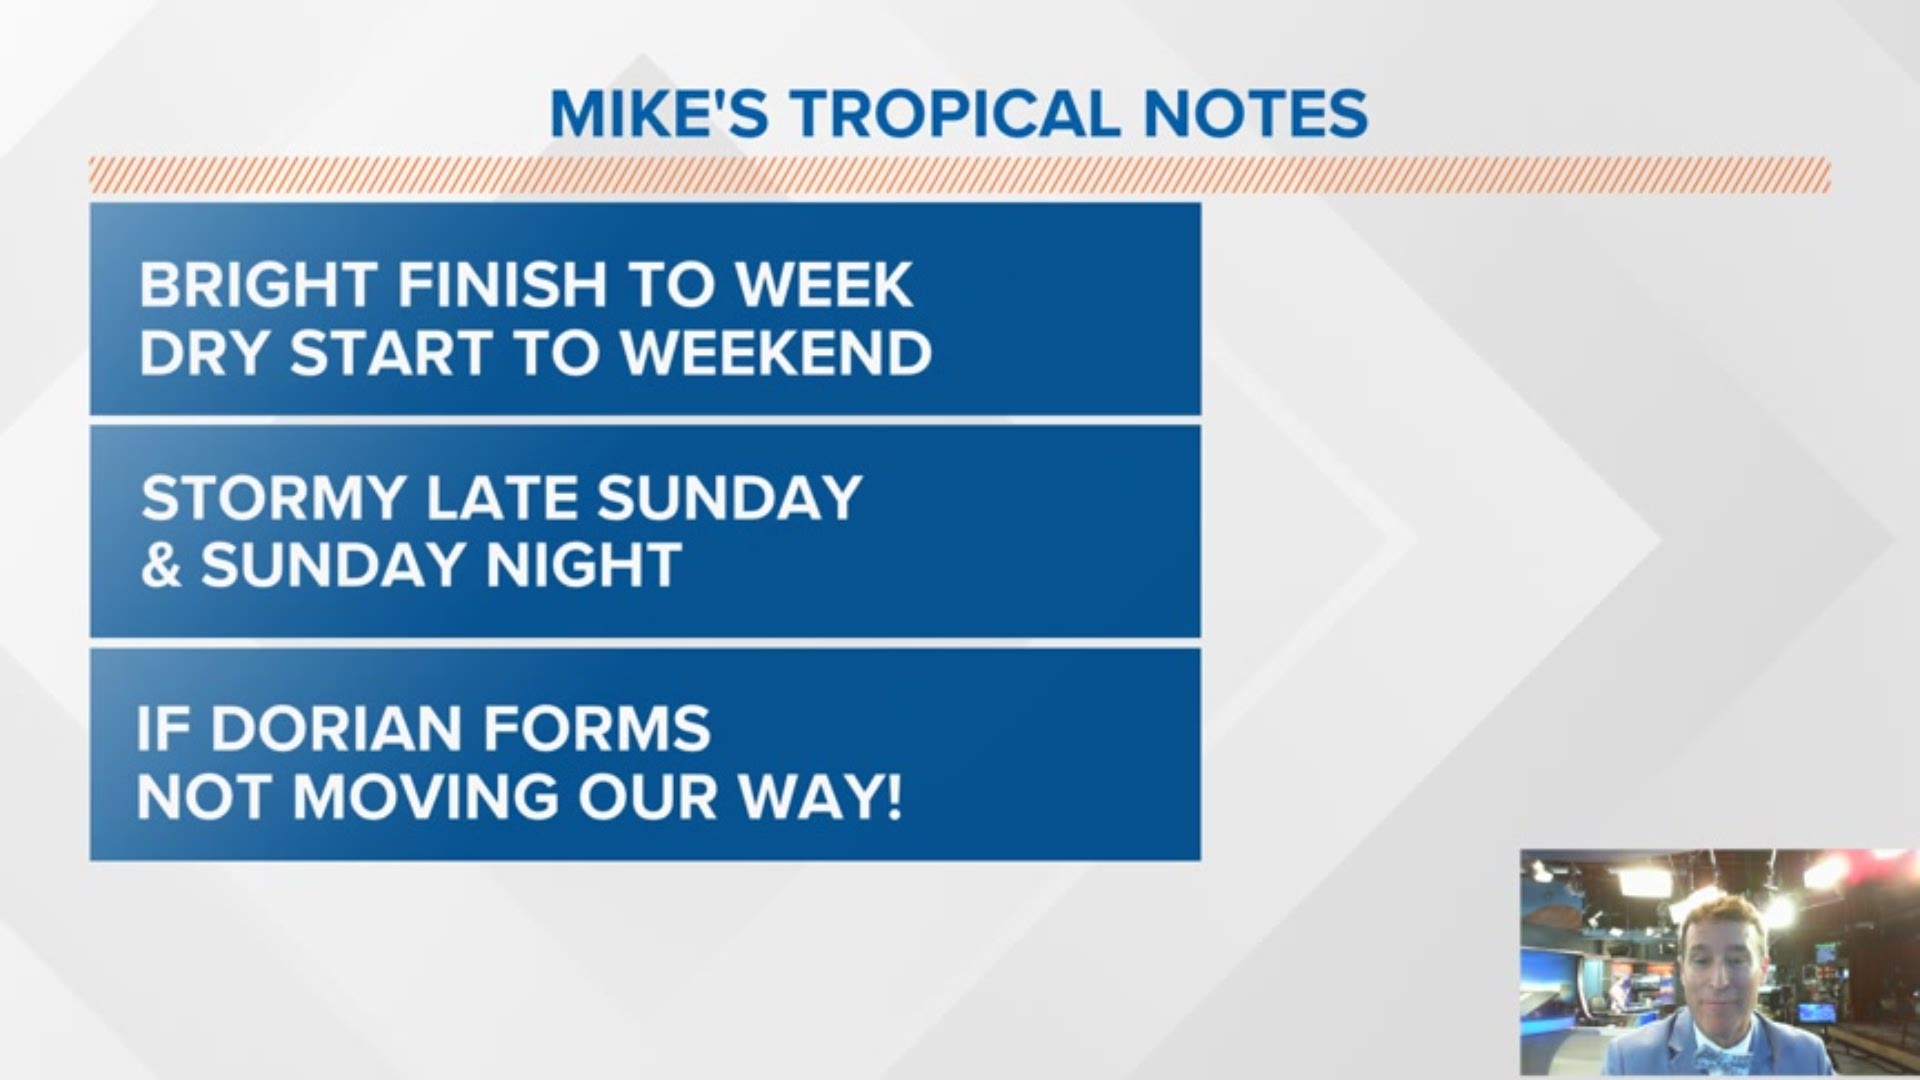 Our big 3 does include plenty of nice weather to start the weekend but check back with us as tropical moisture increases on Sunday.